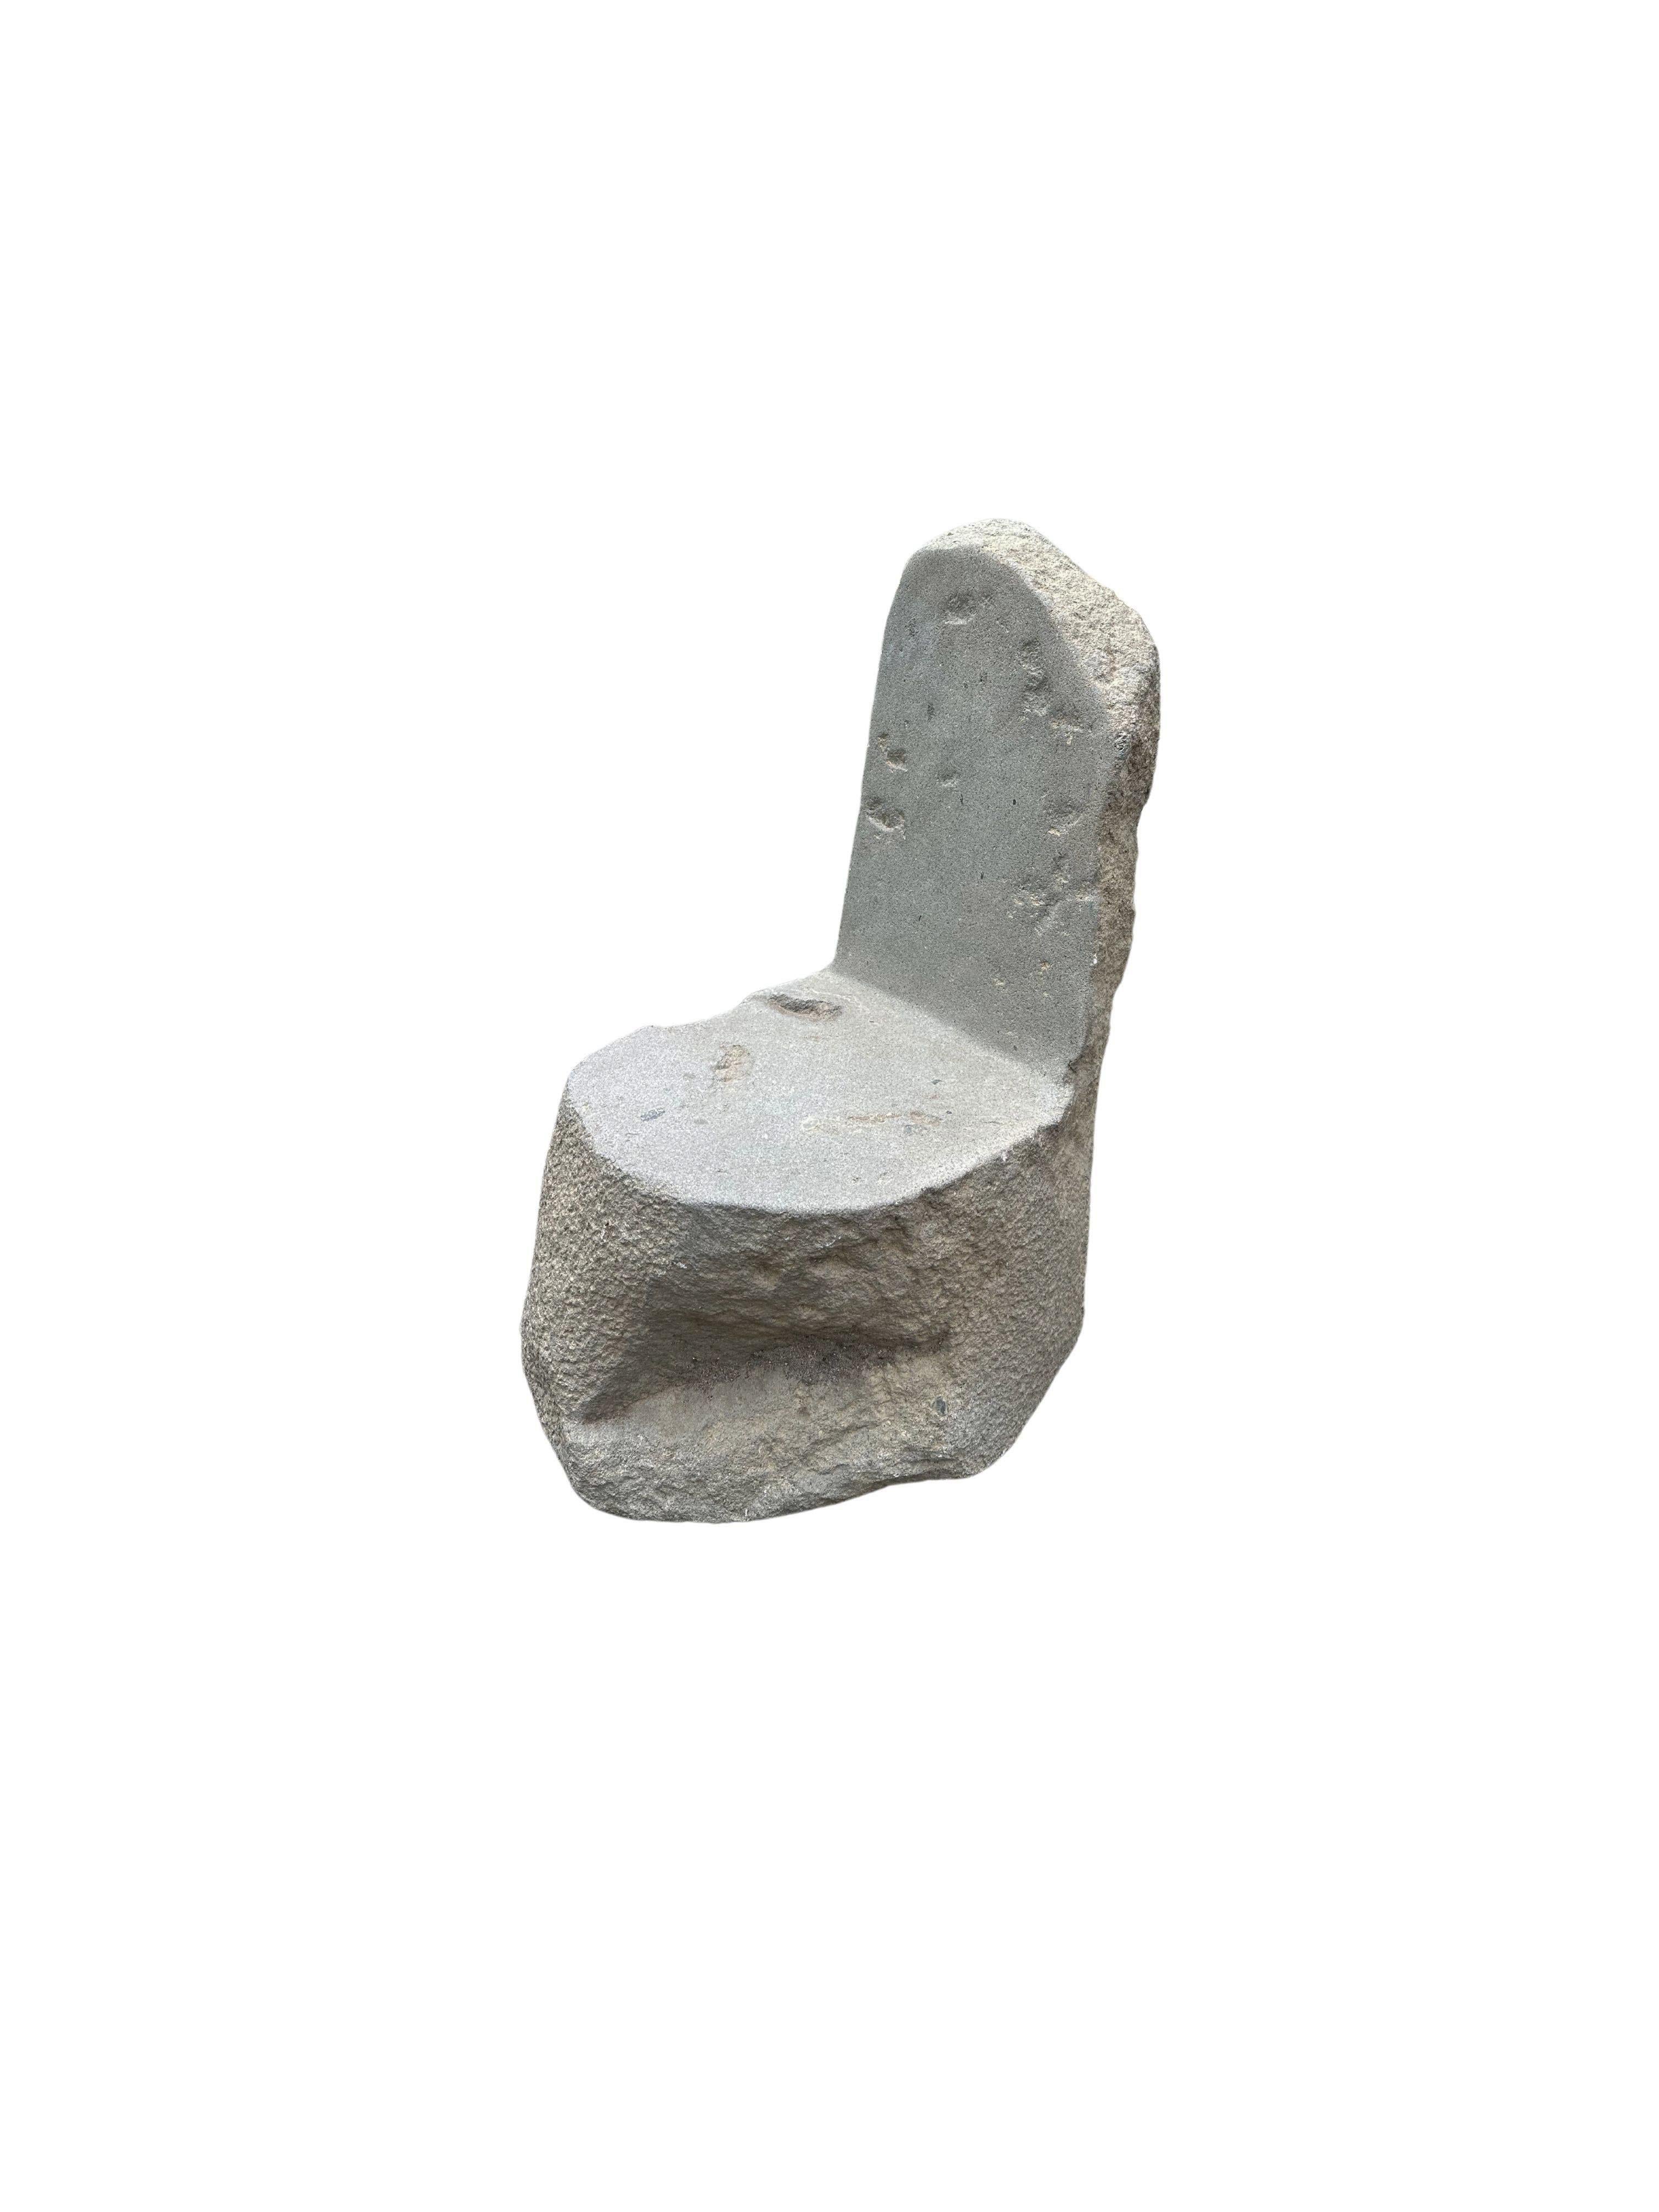 chair made of rock